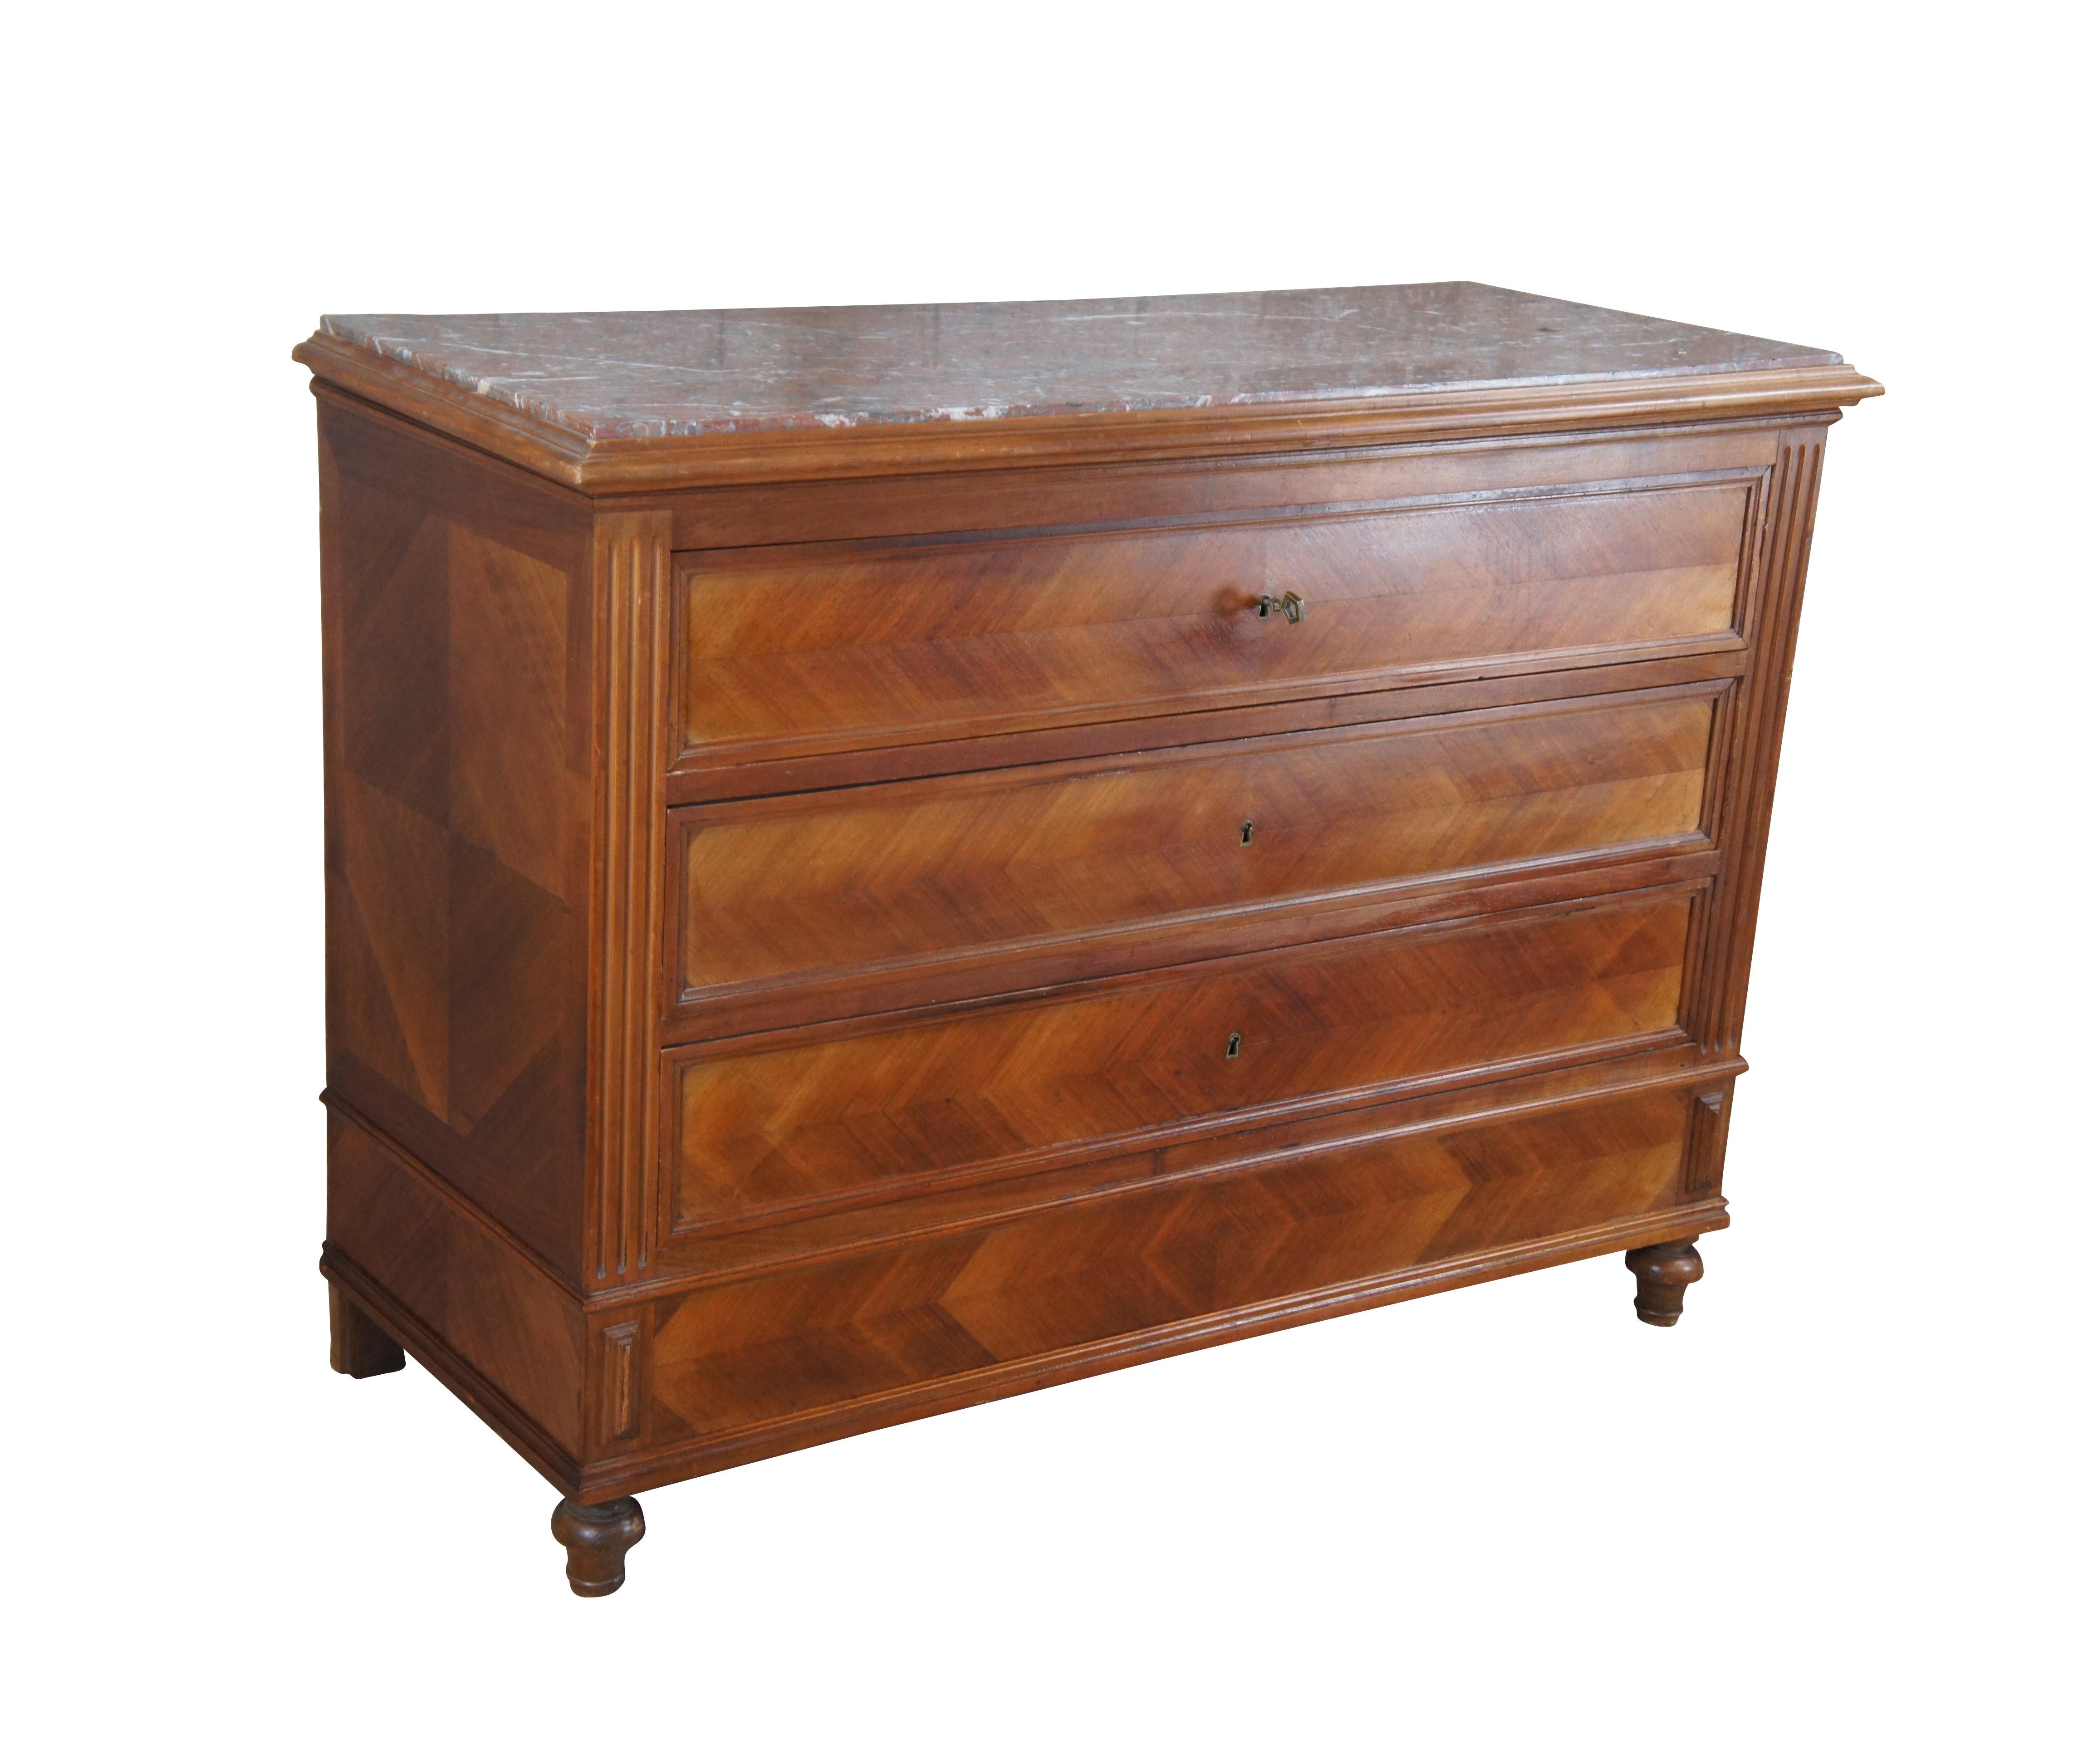 An exceptional 19th Century Louis Philippe Commode. Made from walnut with three hand dovetailed oak drawers. Features a recessed drawer configuration with fluted stiles, inset royal rouge marble top and bun feet. The chest has matchbook walnut front